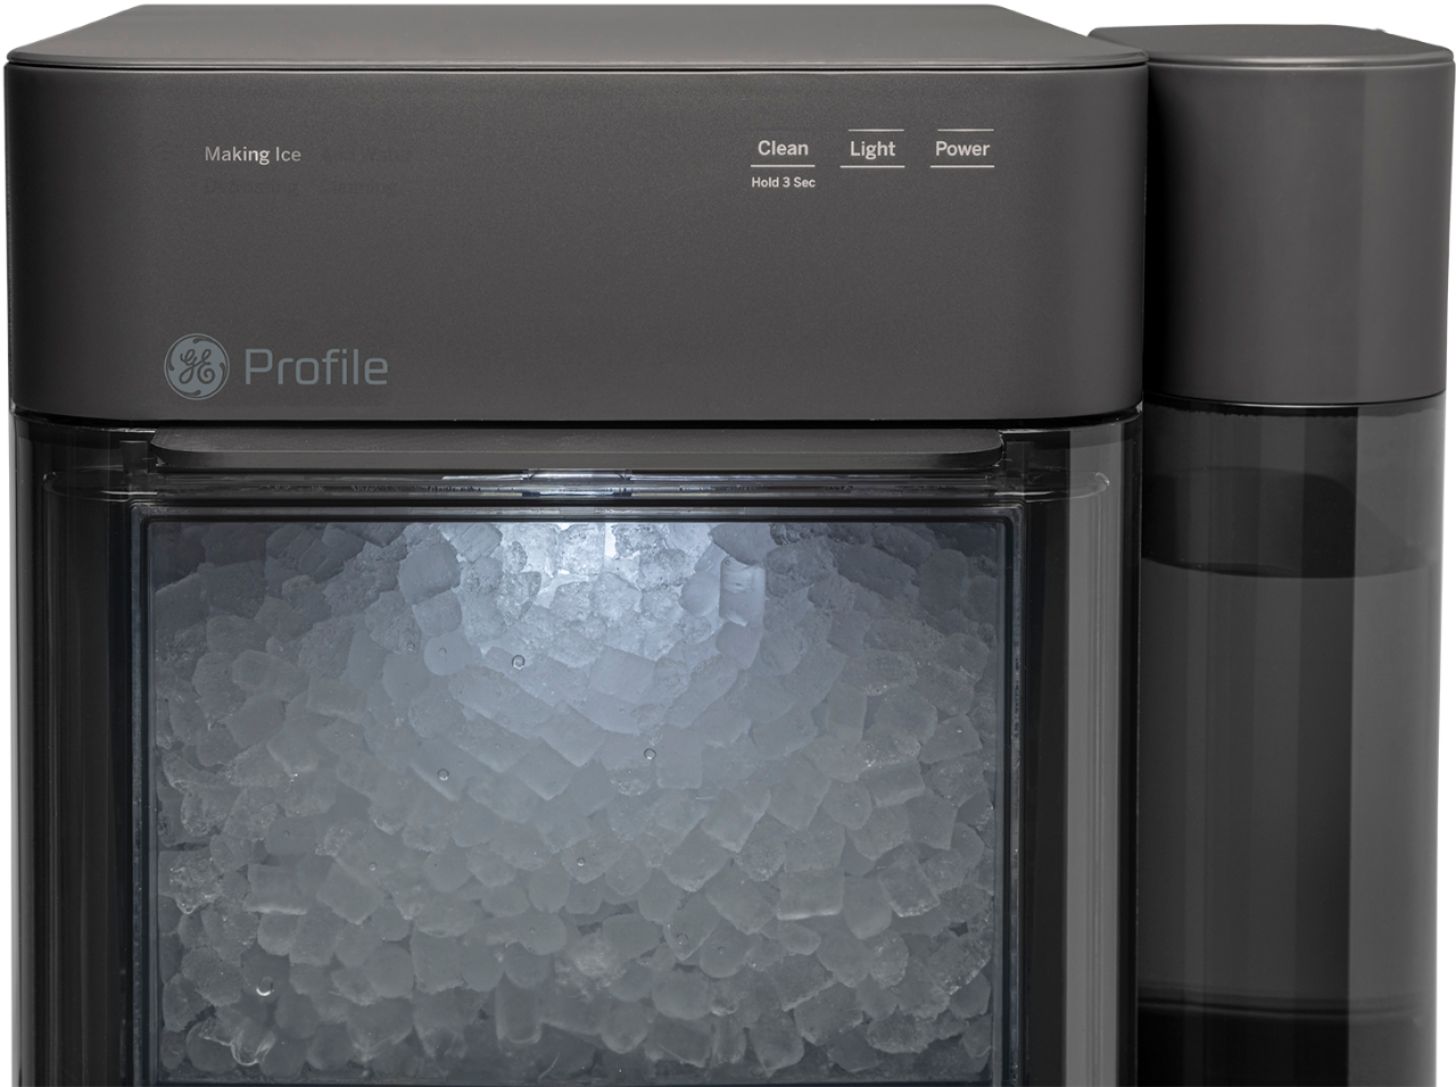 GE Profile Opal 2.0 38-lb. Portable Ice maker with Nugget Ice Production,  Side Tank, and Built-in WiFi Black Stainless Steel XPIO13BCBT - Best Buy